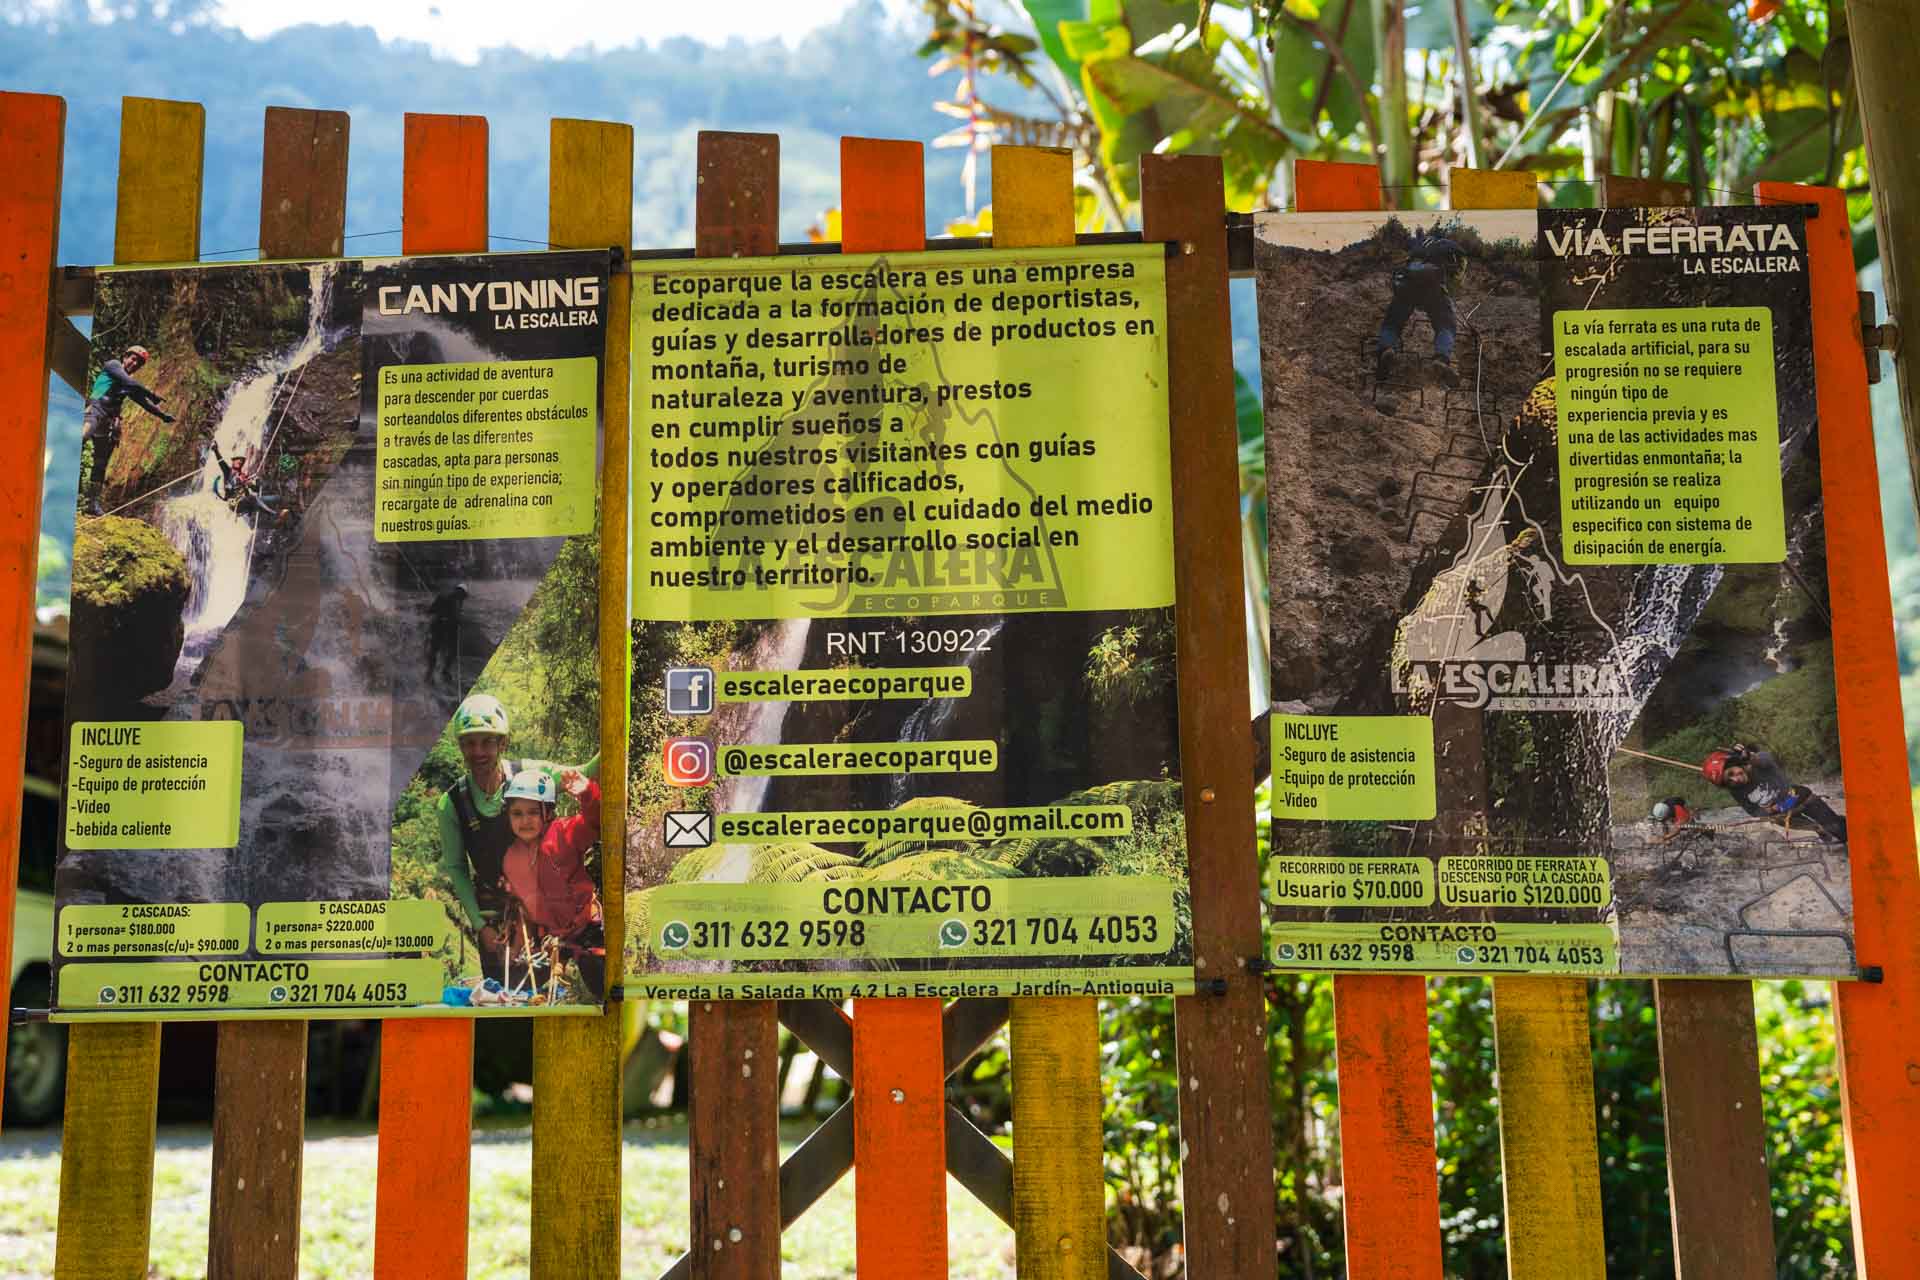 Canyoning information posters on a fence at Cascada la Escalera.